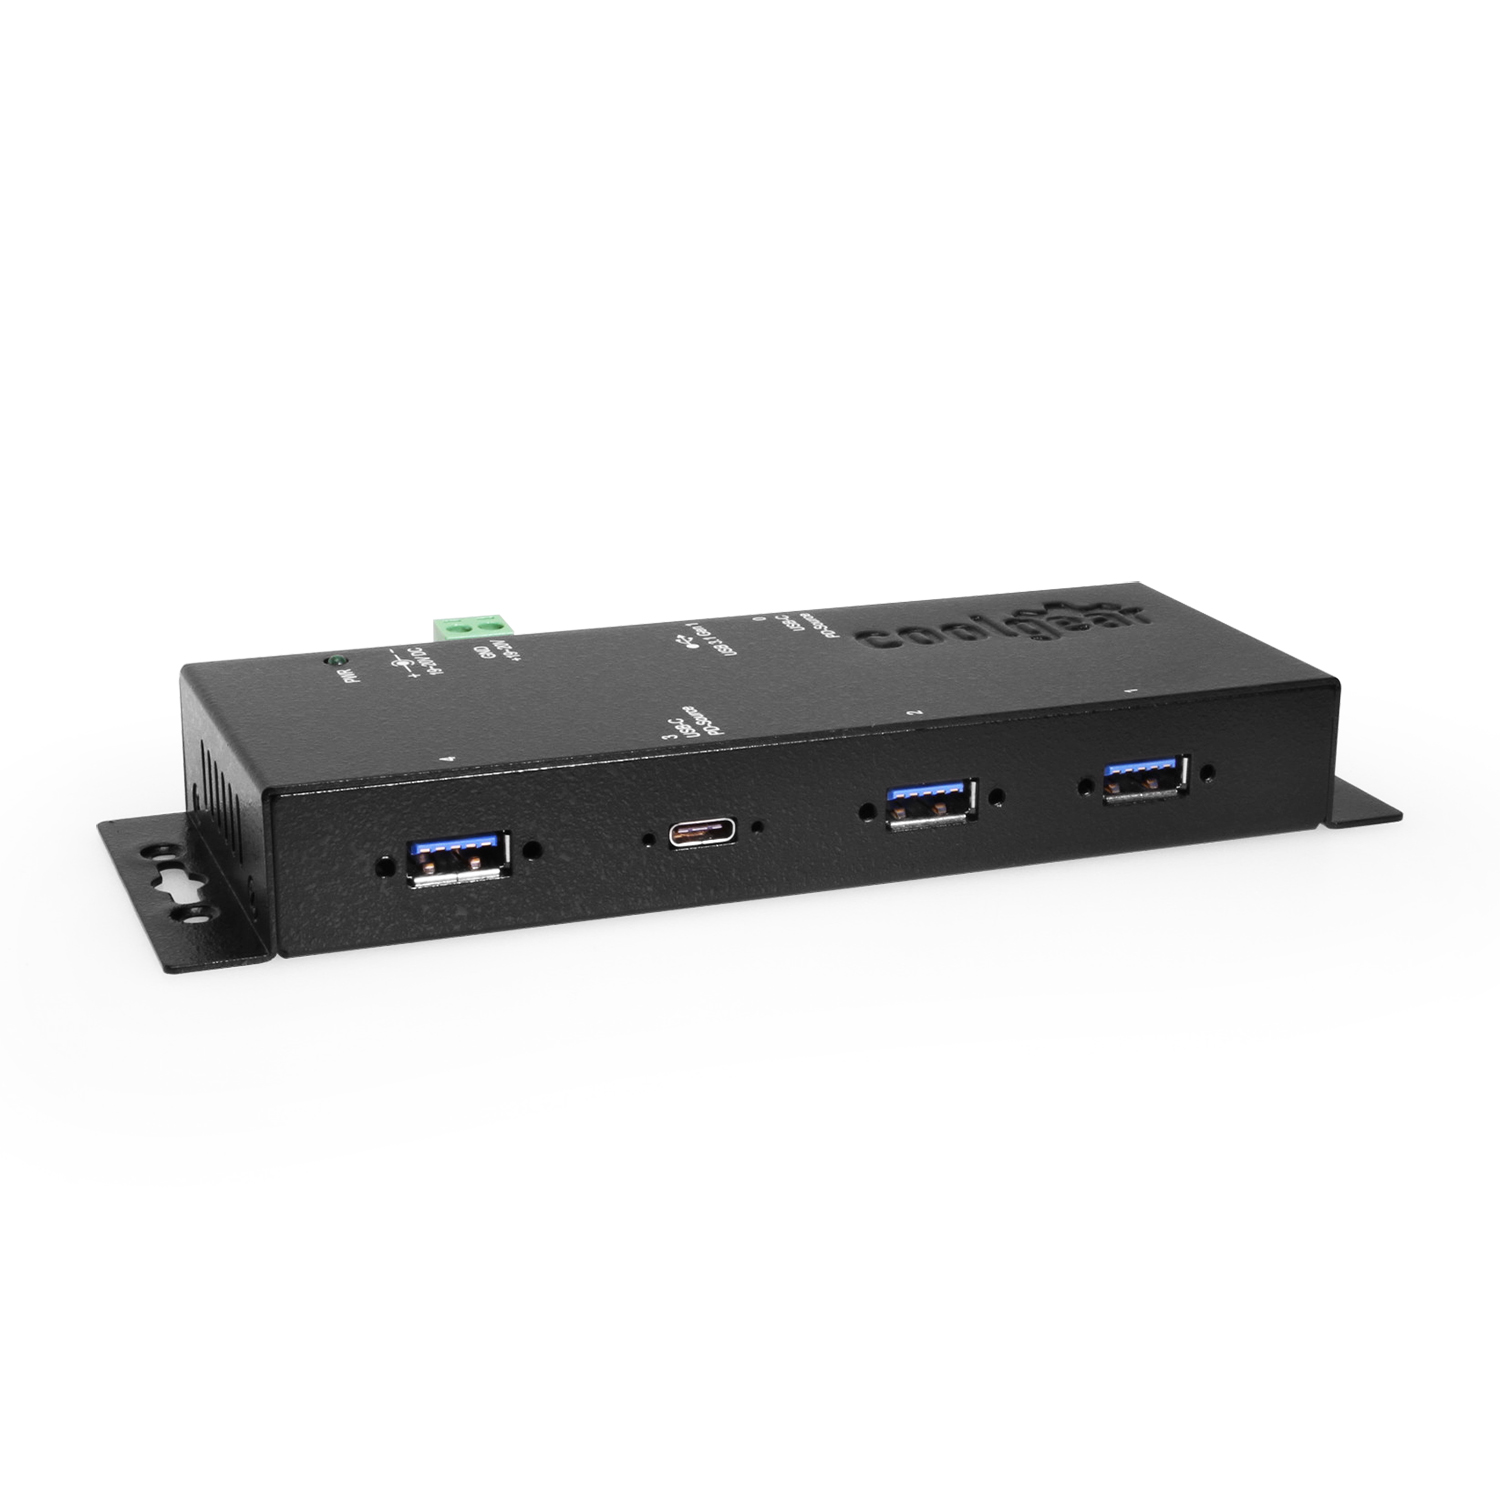 Programmable Industrial 4-port USB Switch for USB-C